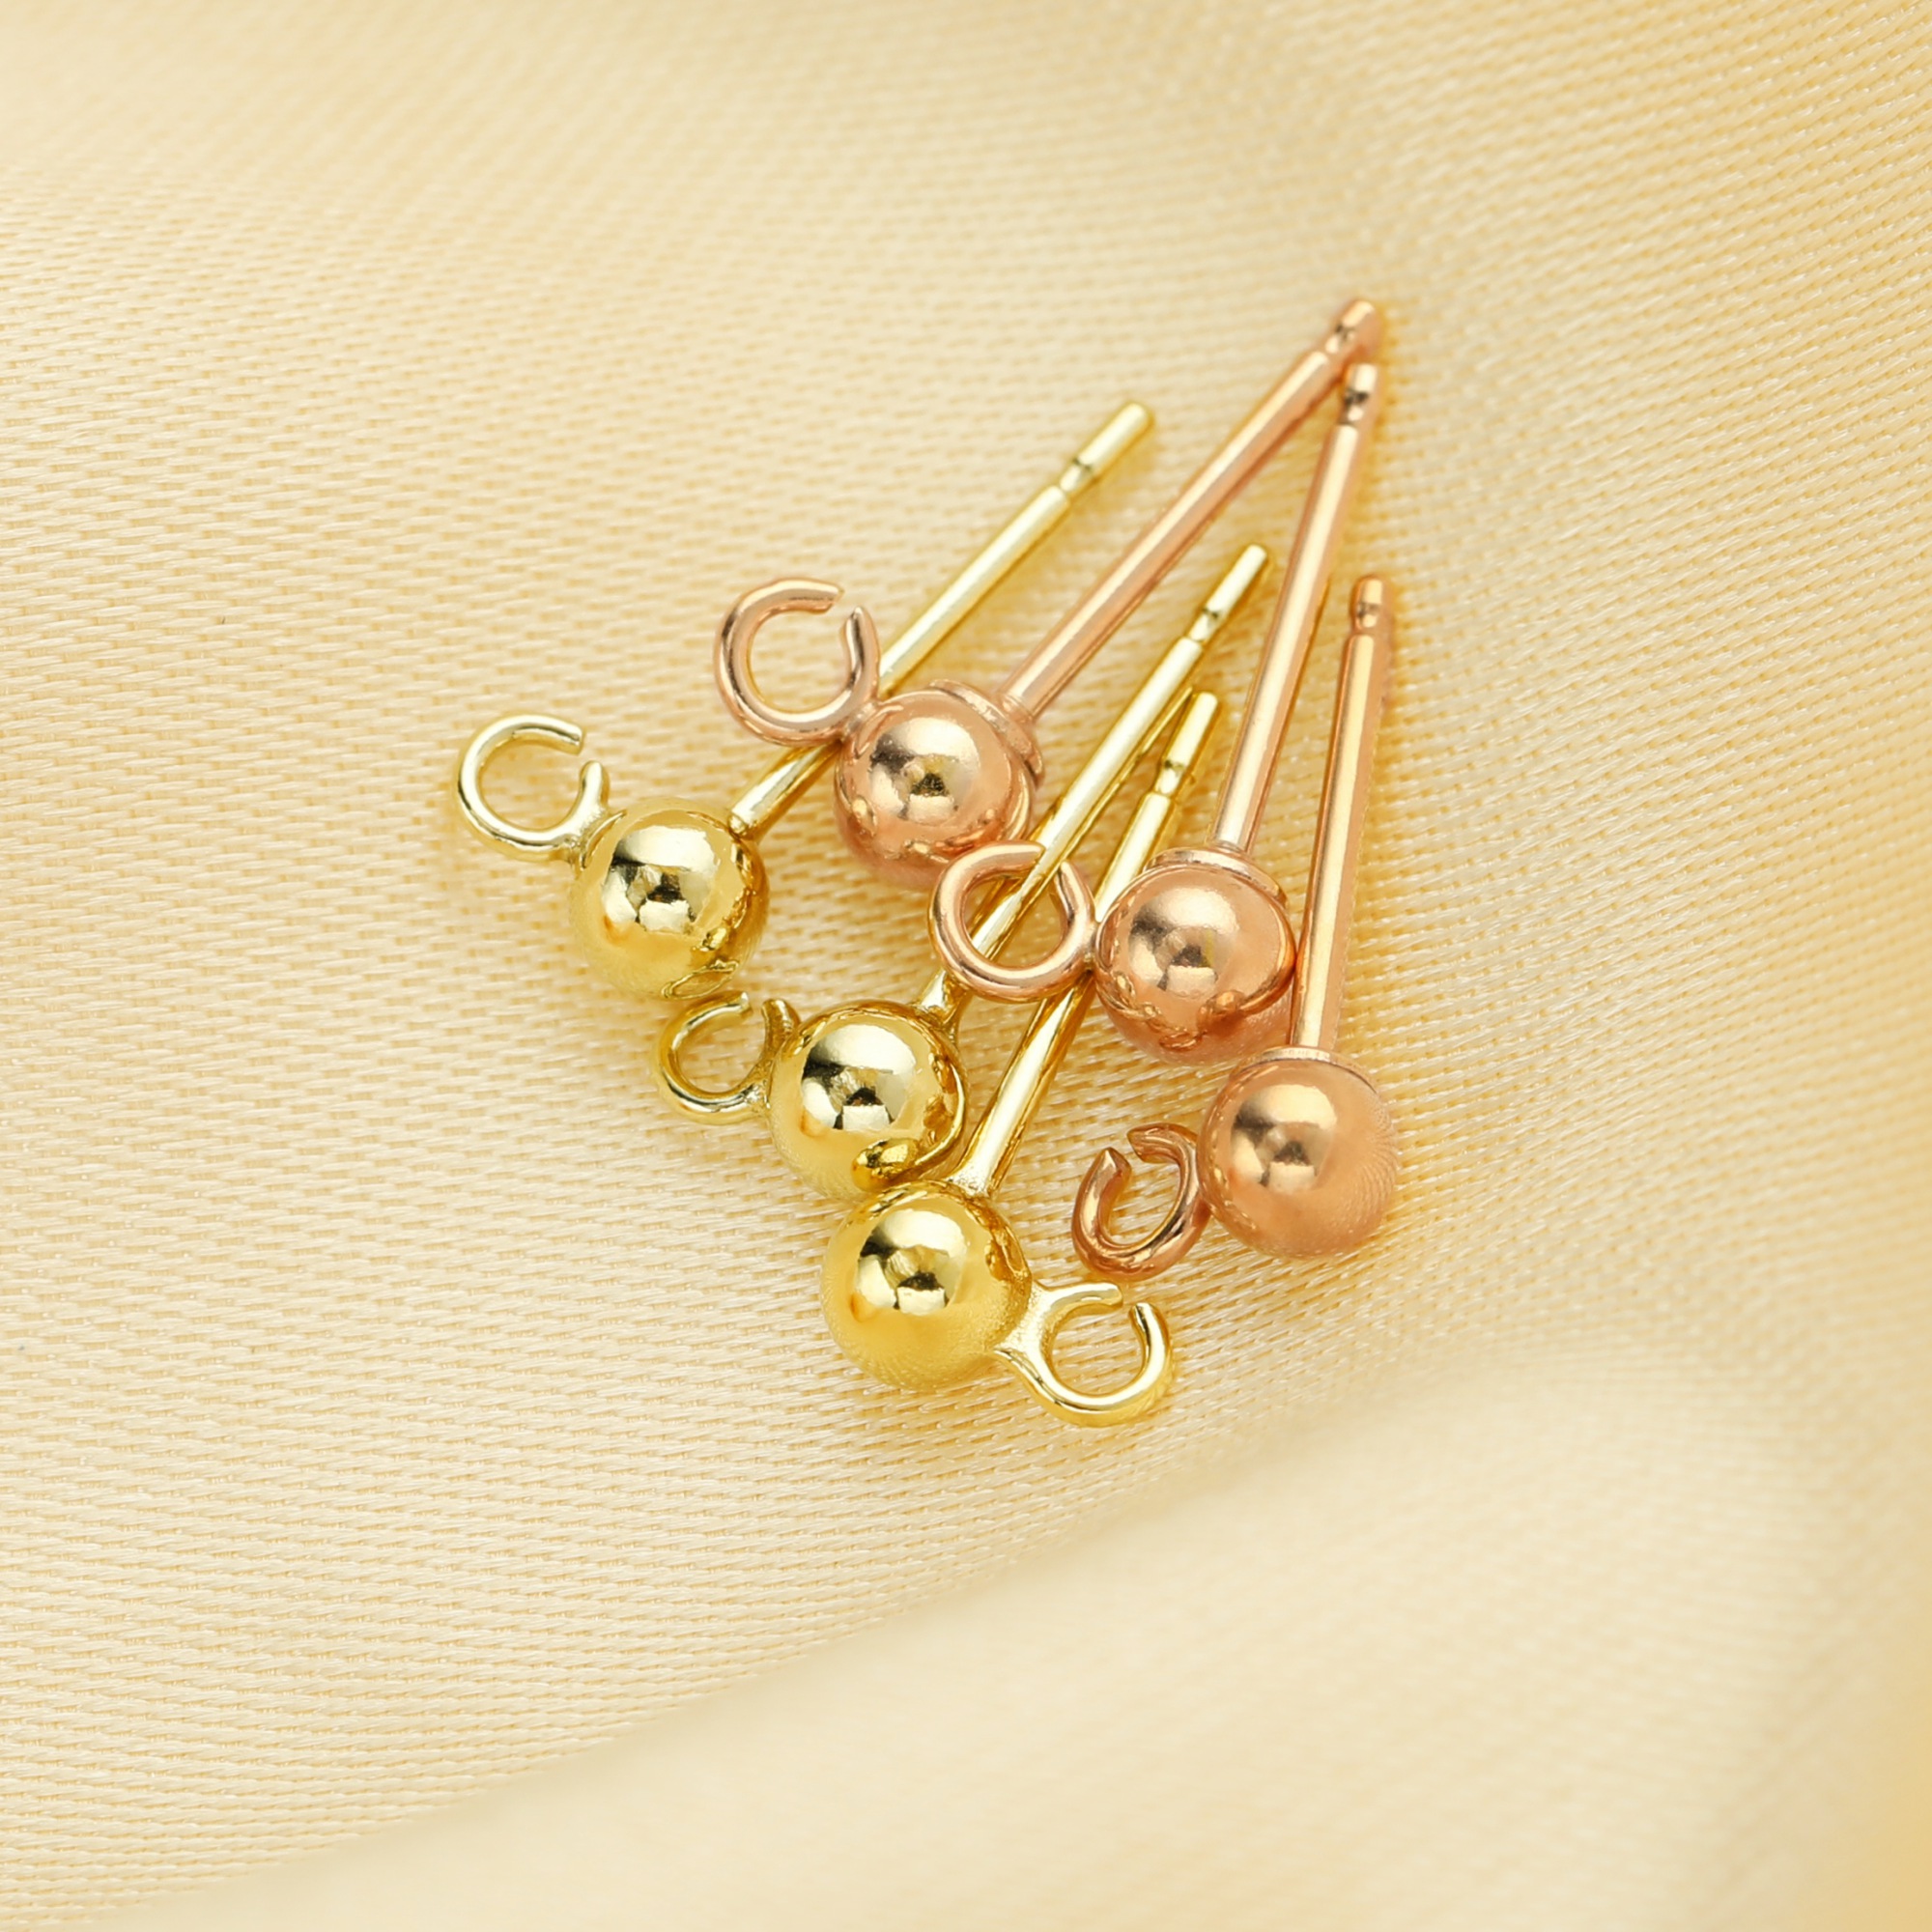 1Pair 2MM Ball Post Studs Earrings with Open Loop,14k Gold Filled Ball Studs Earringss,Minimalist Earringss,DIY Earringss Supplies 1706124 - Click Image to Close